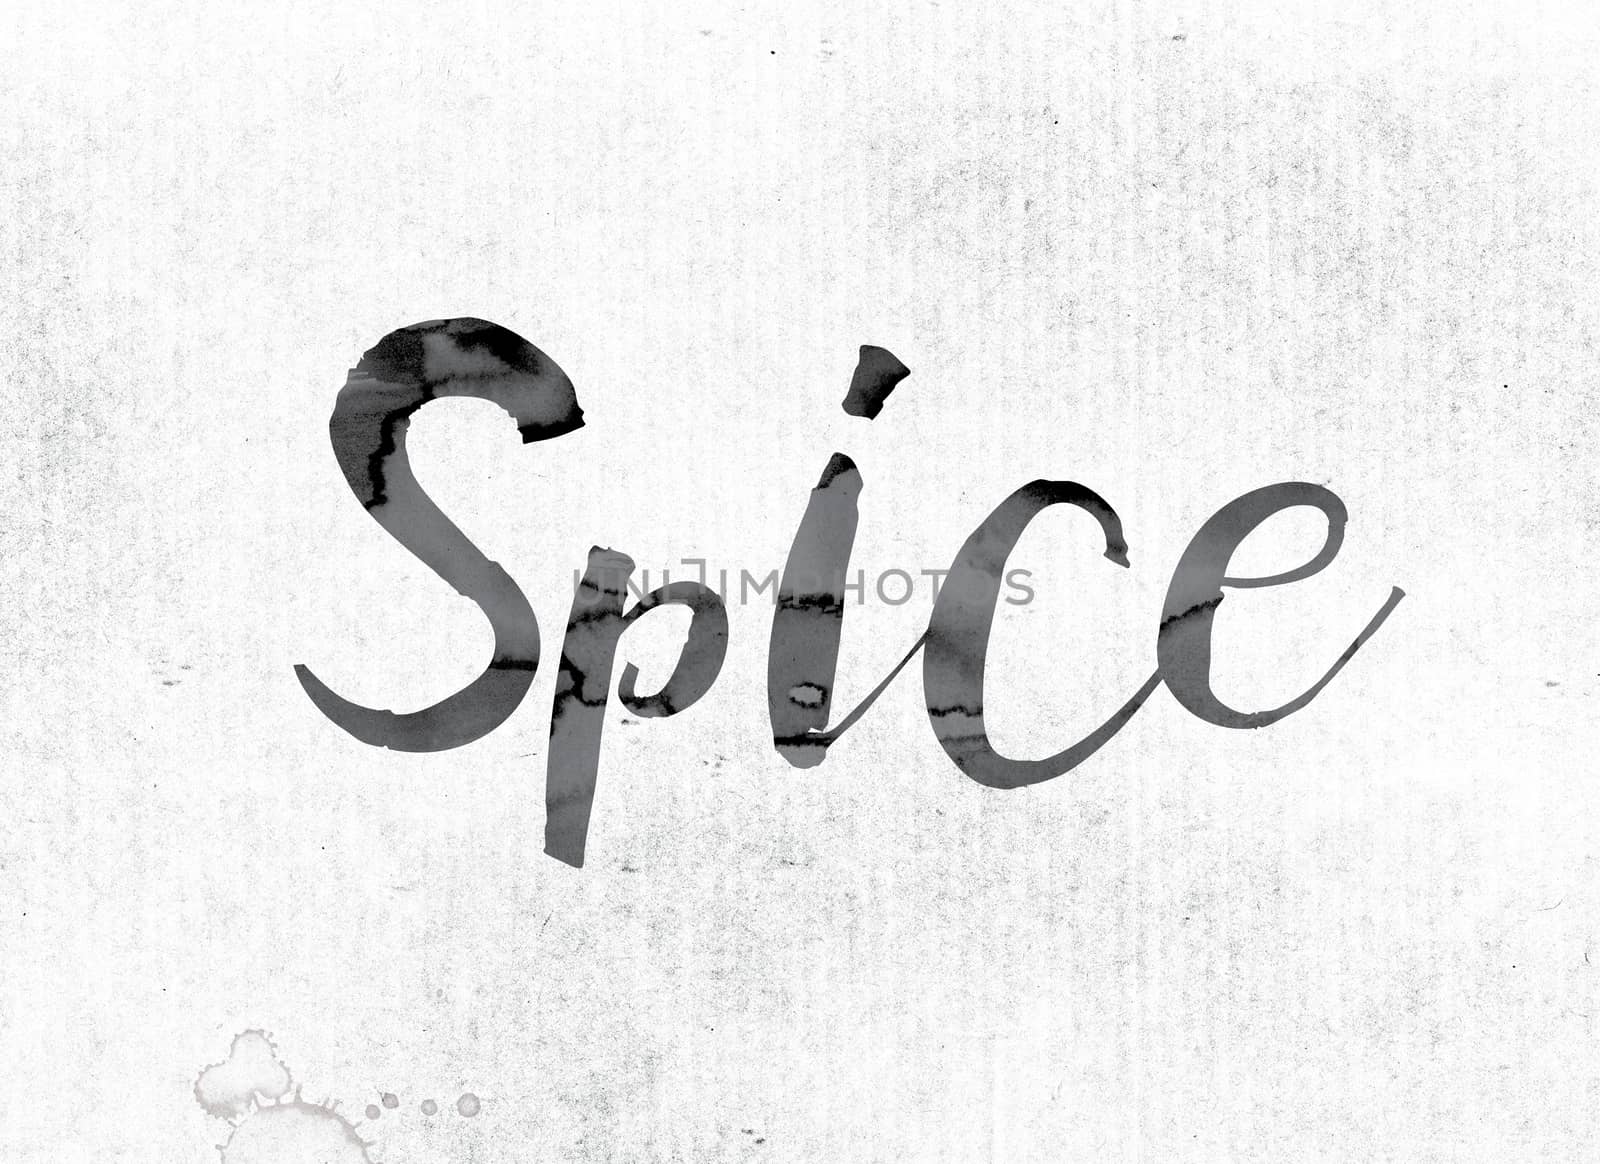 The word "Spice" concept and theme painted in watercolor ink on a white paper.